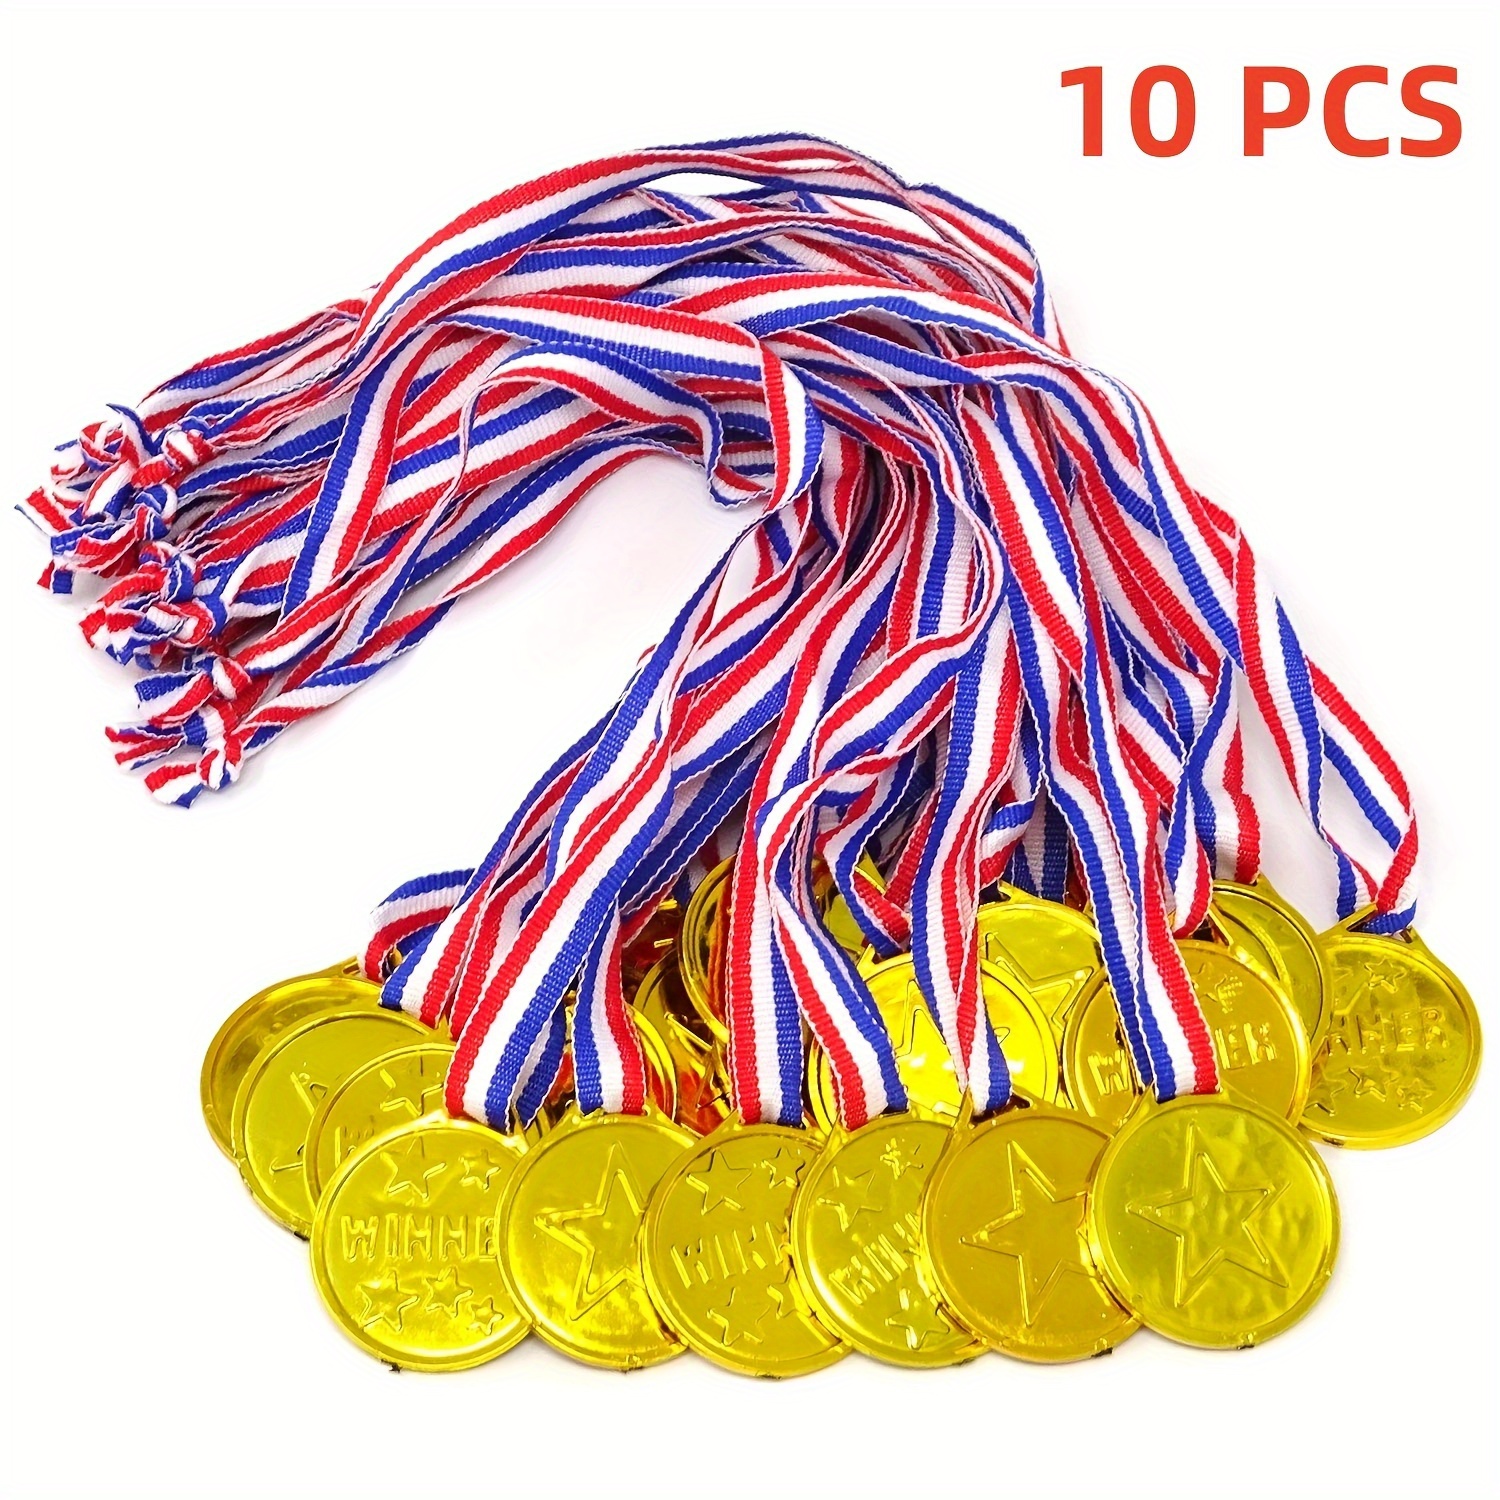 

10pcs Golden Plastic Award Medals, Winner Awards For Sports, Competition, , Spelling Bee